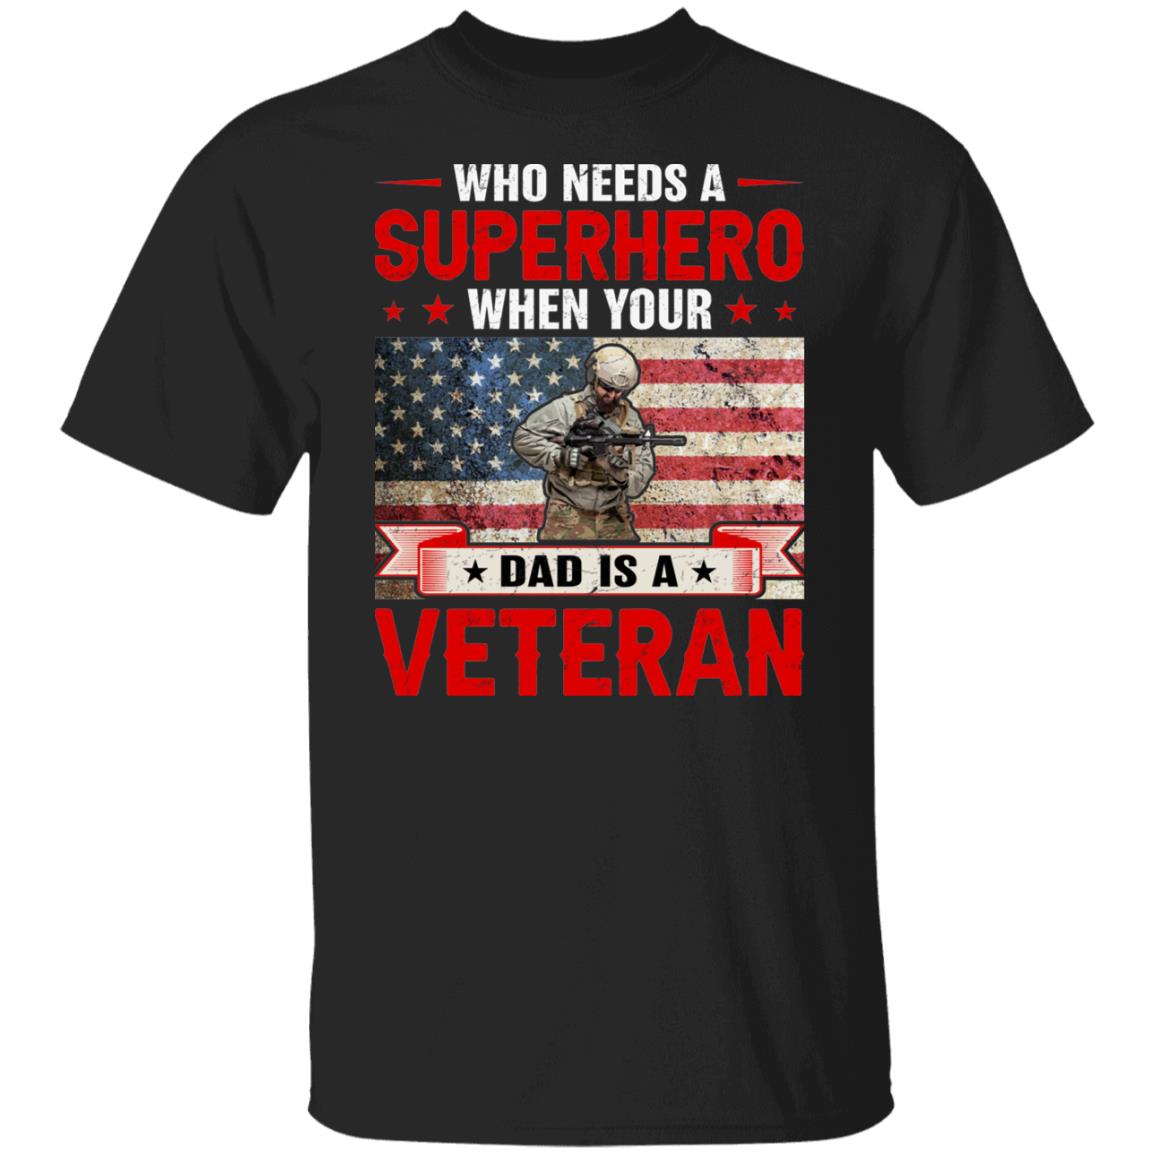 Who Needs a Superhero when Your Dad is A Veteran Shirt